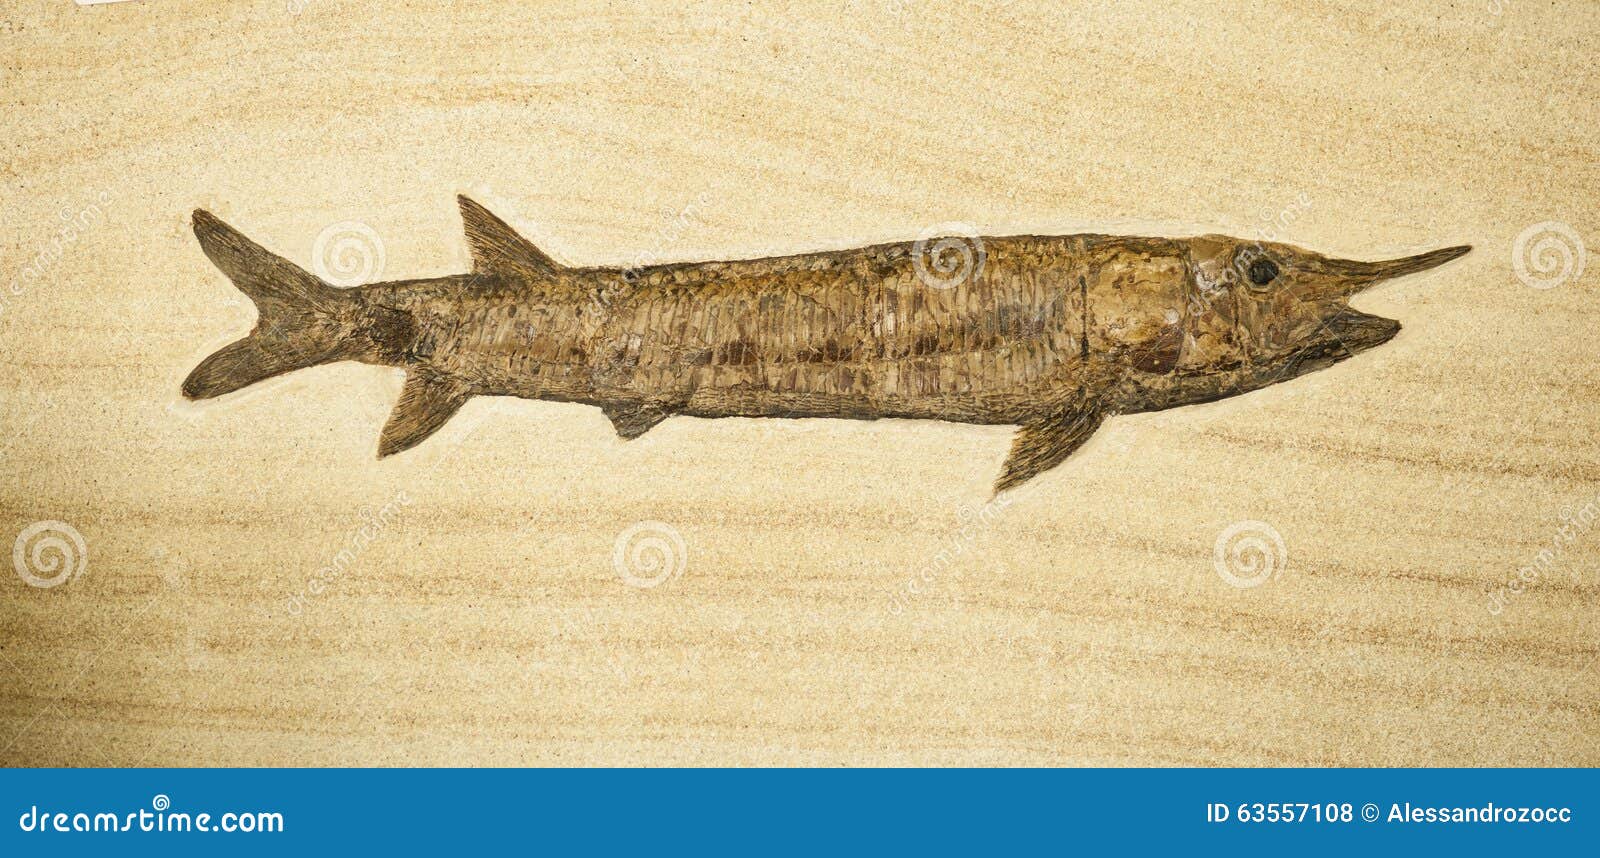 fosil of fish with long body